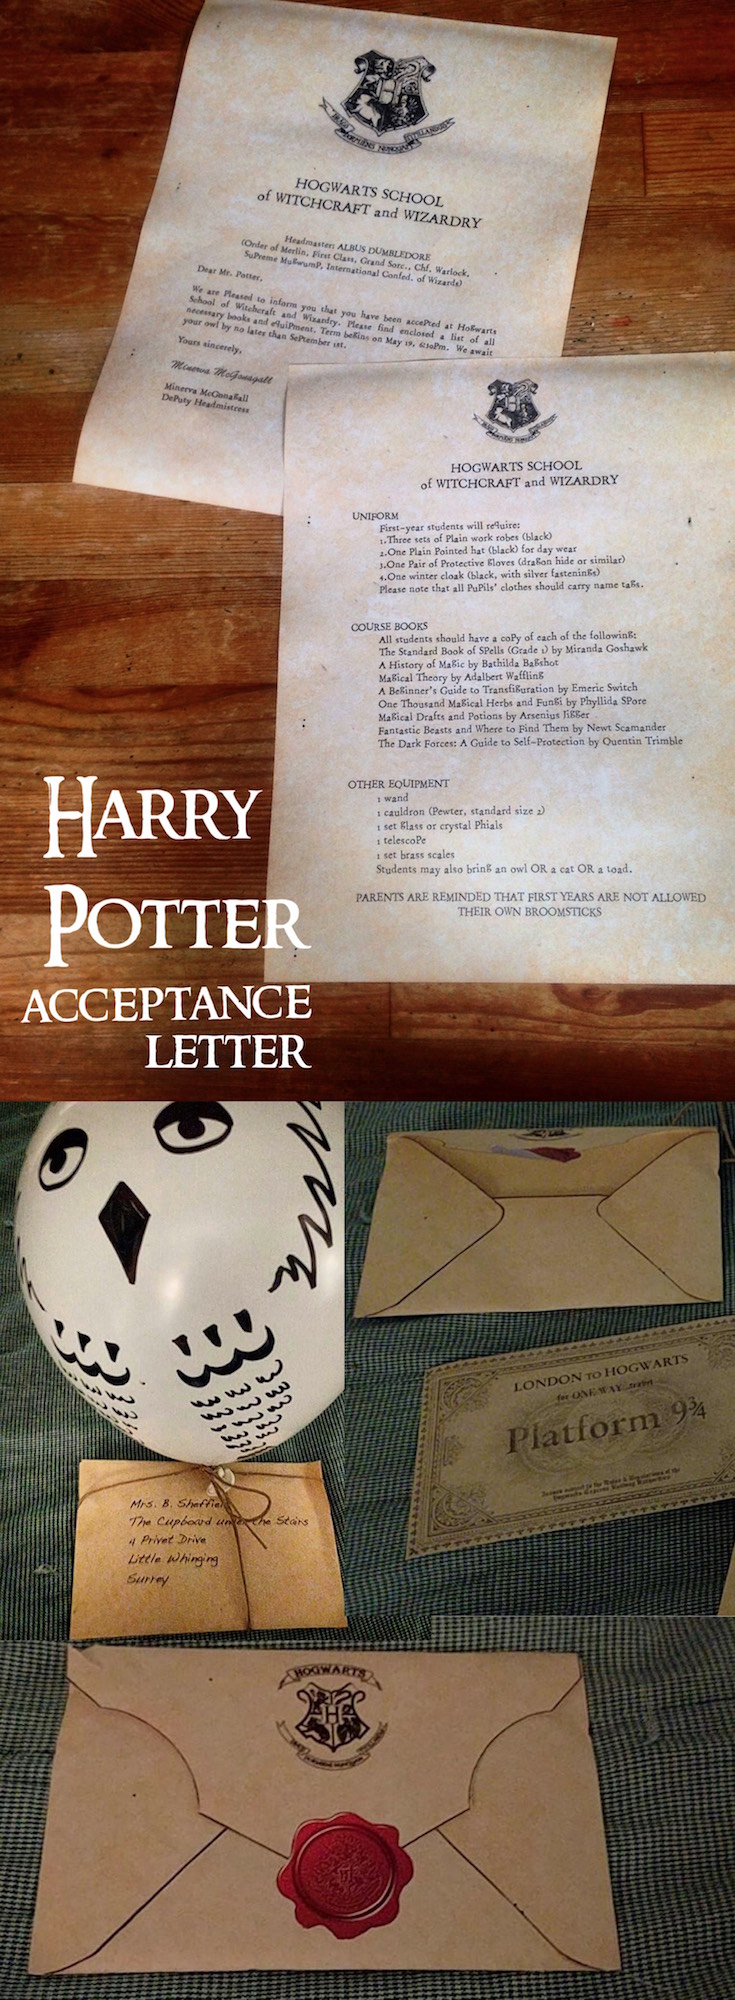 Harry Potter Hogwarts Acceptance Letter easy DIY tutorial with template. Easy tutorial with everything you need to easily make ad personalize your own Hogwarts acceptance letter.